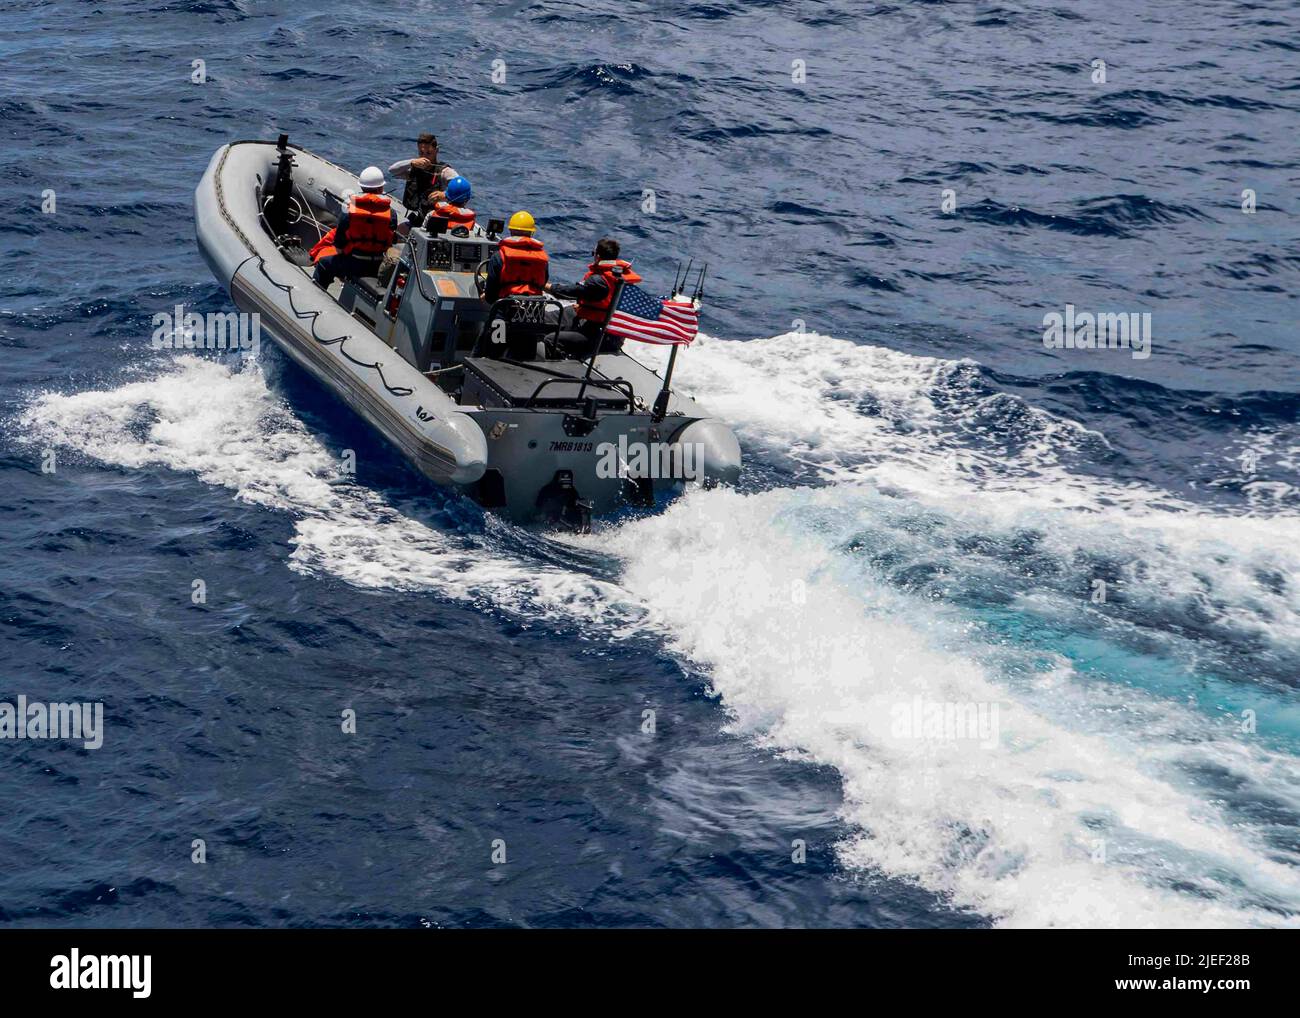 PACIFIC OCEAN (June 23, 2022) Sailors assigned to the Arleigh Burke-class guided-missile destroyer USS Gridley (DDG 101), transit on a rigid-hull inflatable boat (RHIB) during a personnel transfer. Abraham Lincoln Carrier Strike Group is underway conducting routine operations in the U.S. 3rd Fleet. (U.S. Navy photo by Mass Communication Specialist 2nd Class Colby A. Mothershead) Stock Photo